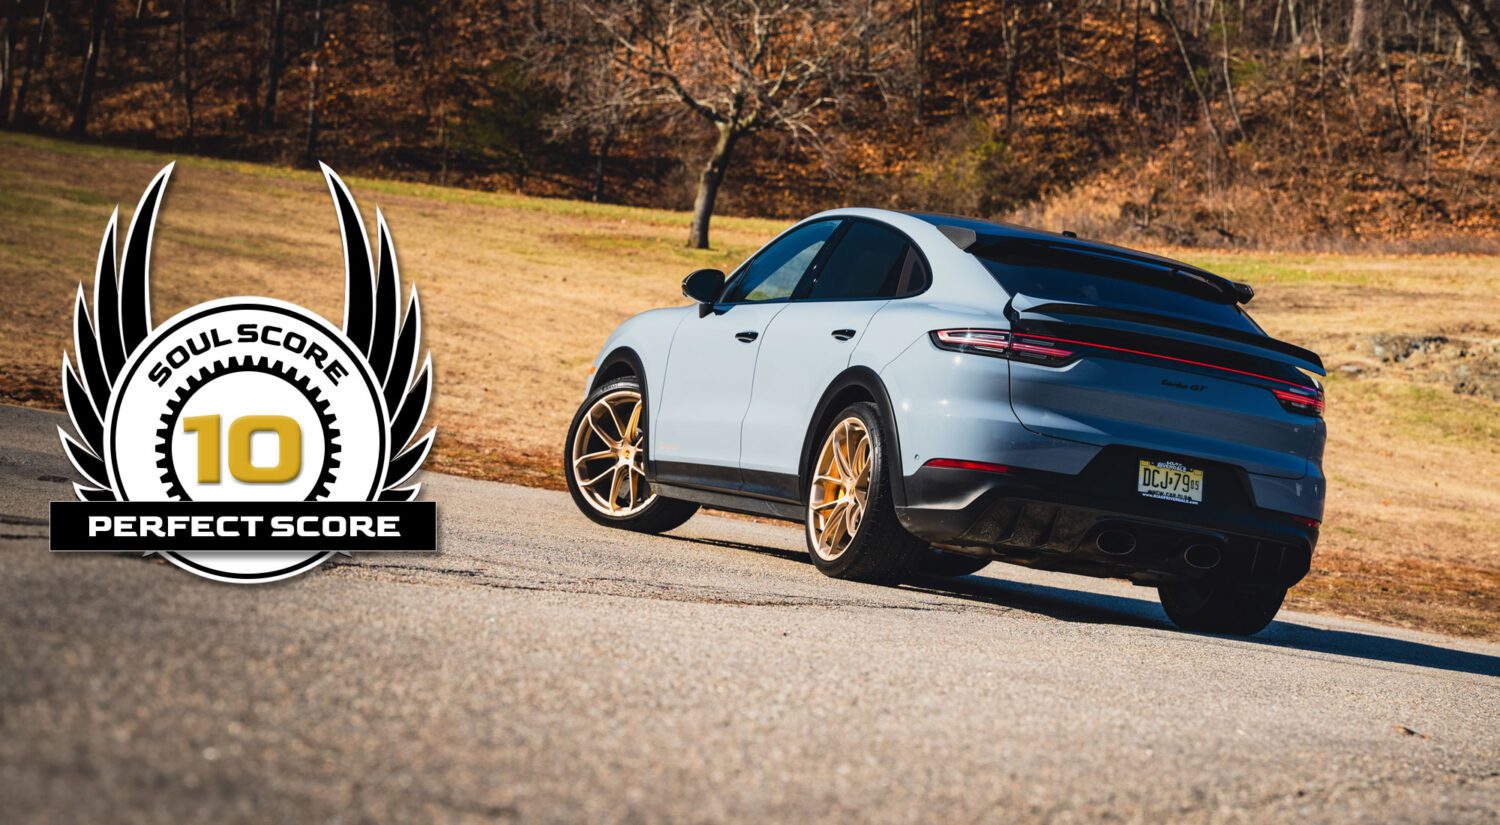 The Porsche Cayenne Turbo GT plays a numbers game